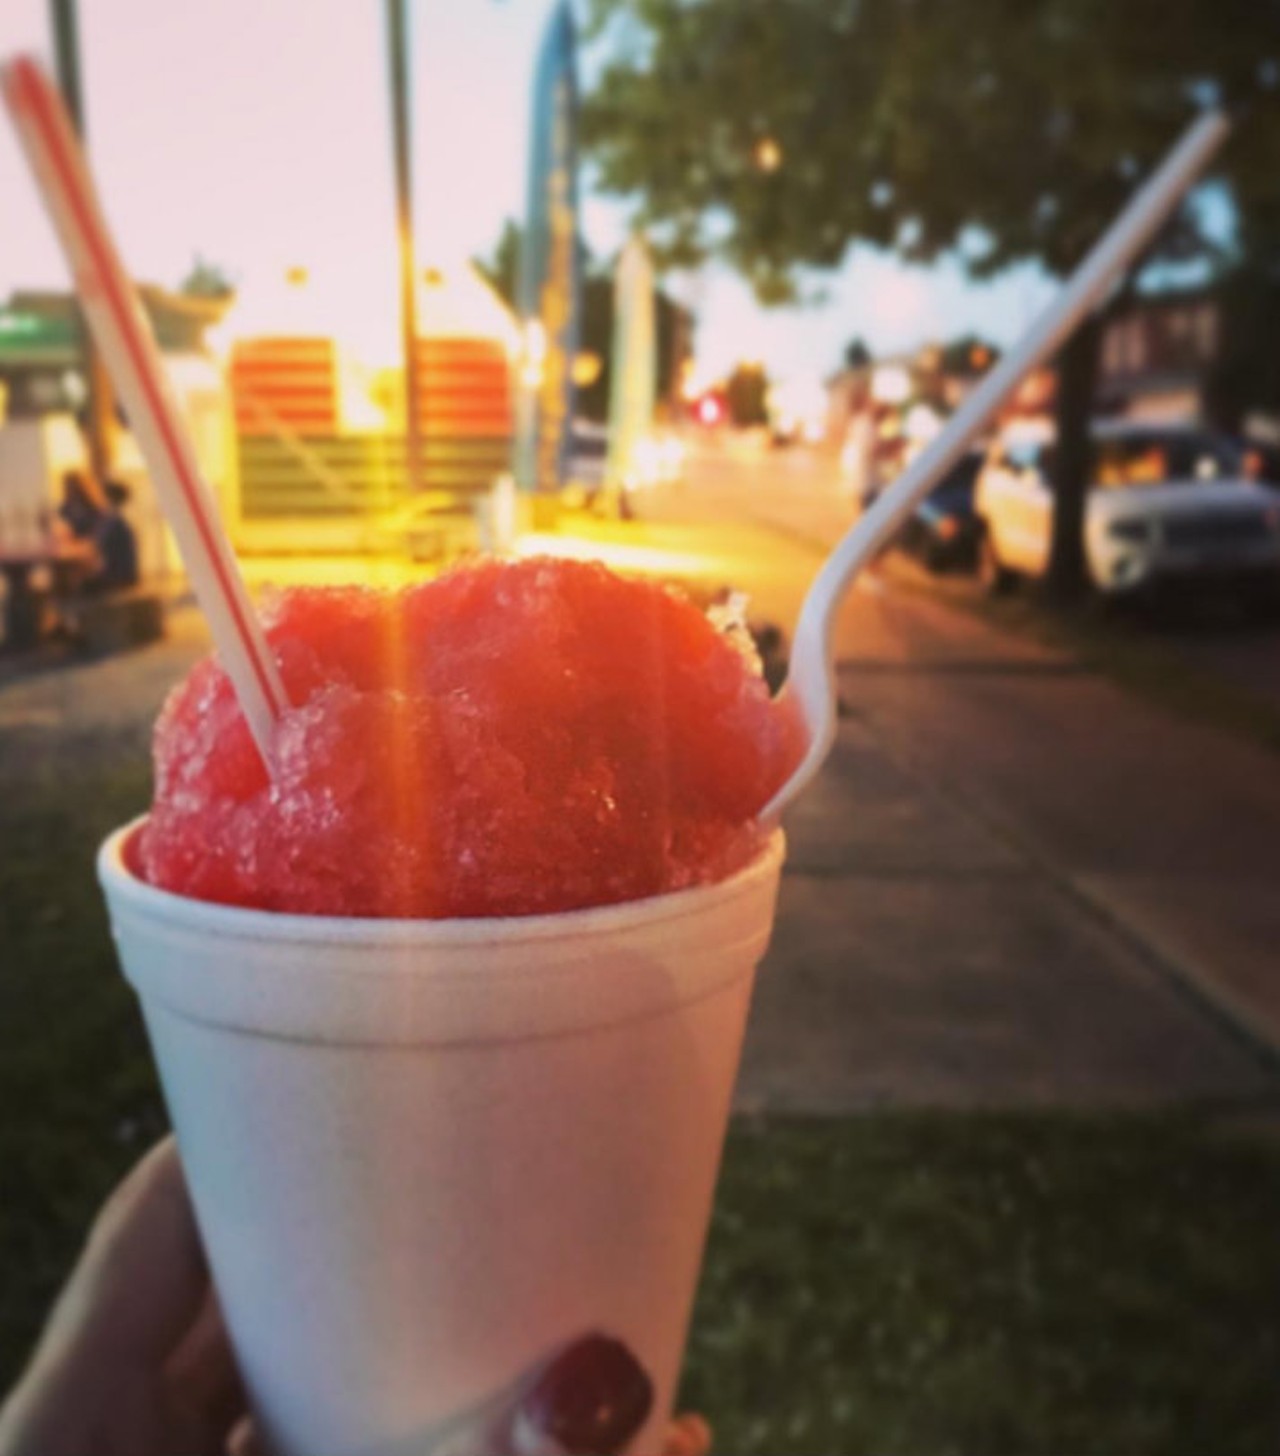 Murray&#146;s Shaved Ice
3407 Watson Rd., St. Louis, MO 63139
(314) 952-6255
Tigerblood, Bahama Mama, Frozen Mudslide, oh my! If you&#146;re in need for a tasty way to cool off, Murray&#146;s Shaved Ice is a great place to do it. Photo courtesy of Instagram / future_mrs_tieman.